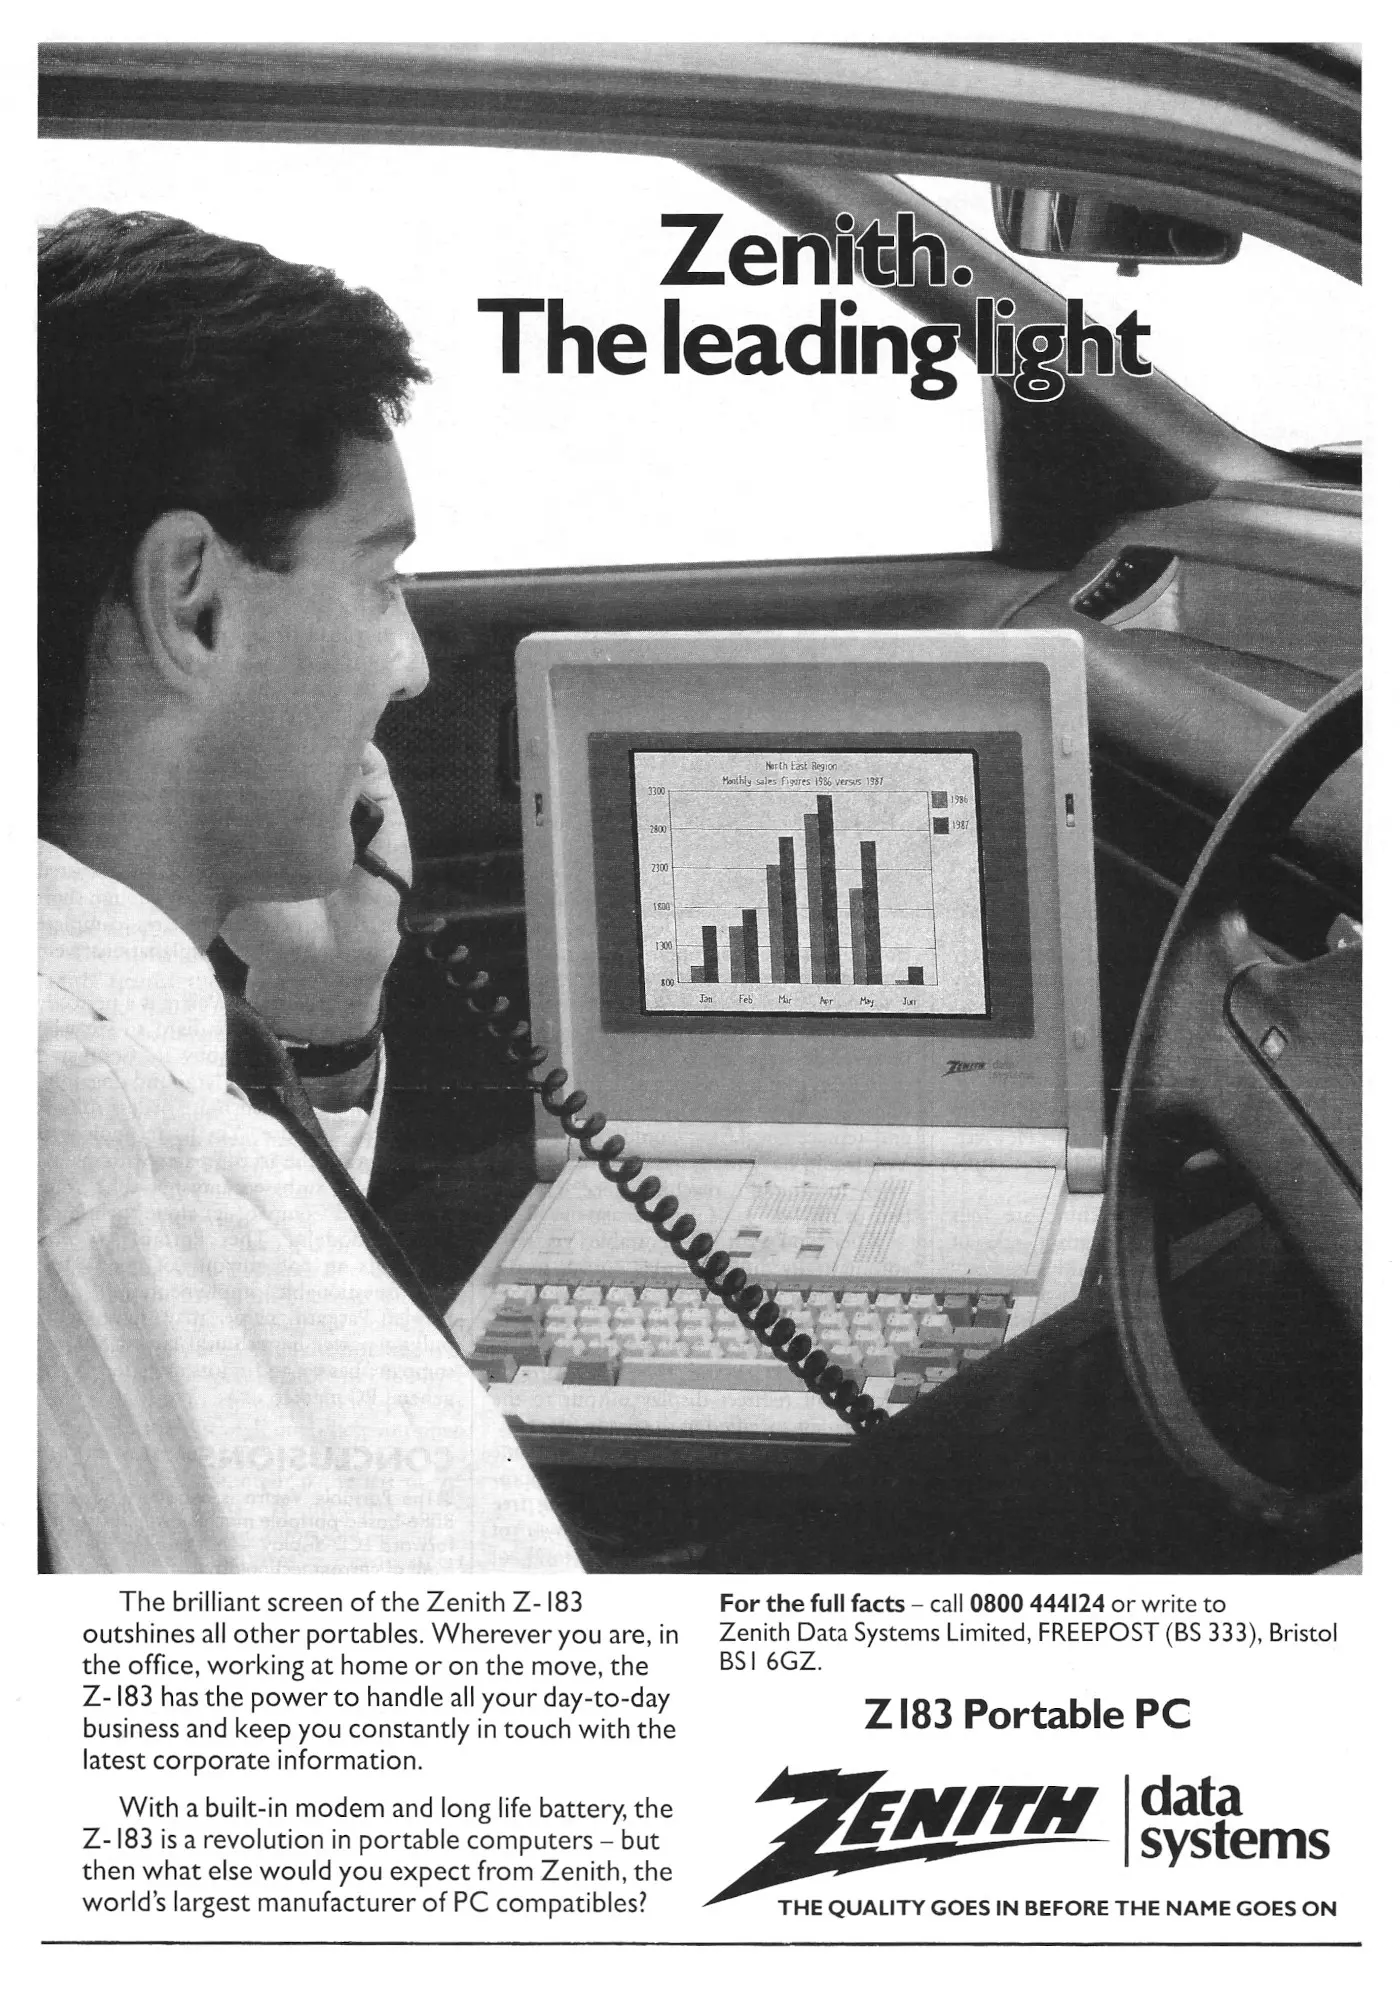 Zenith Data Systems Advert: Zenith: The leading light, from Practical Computing, December 1987